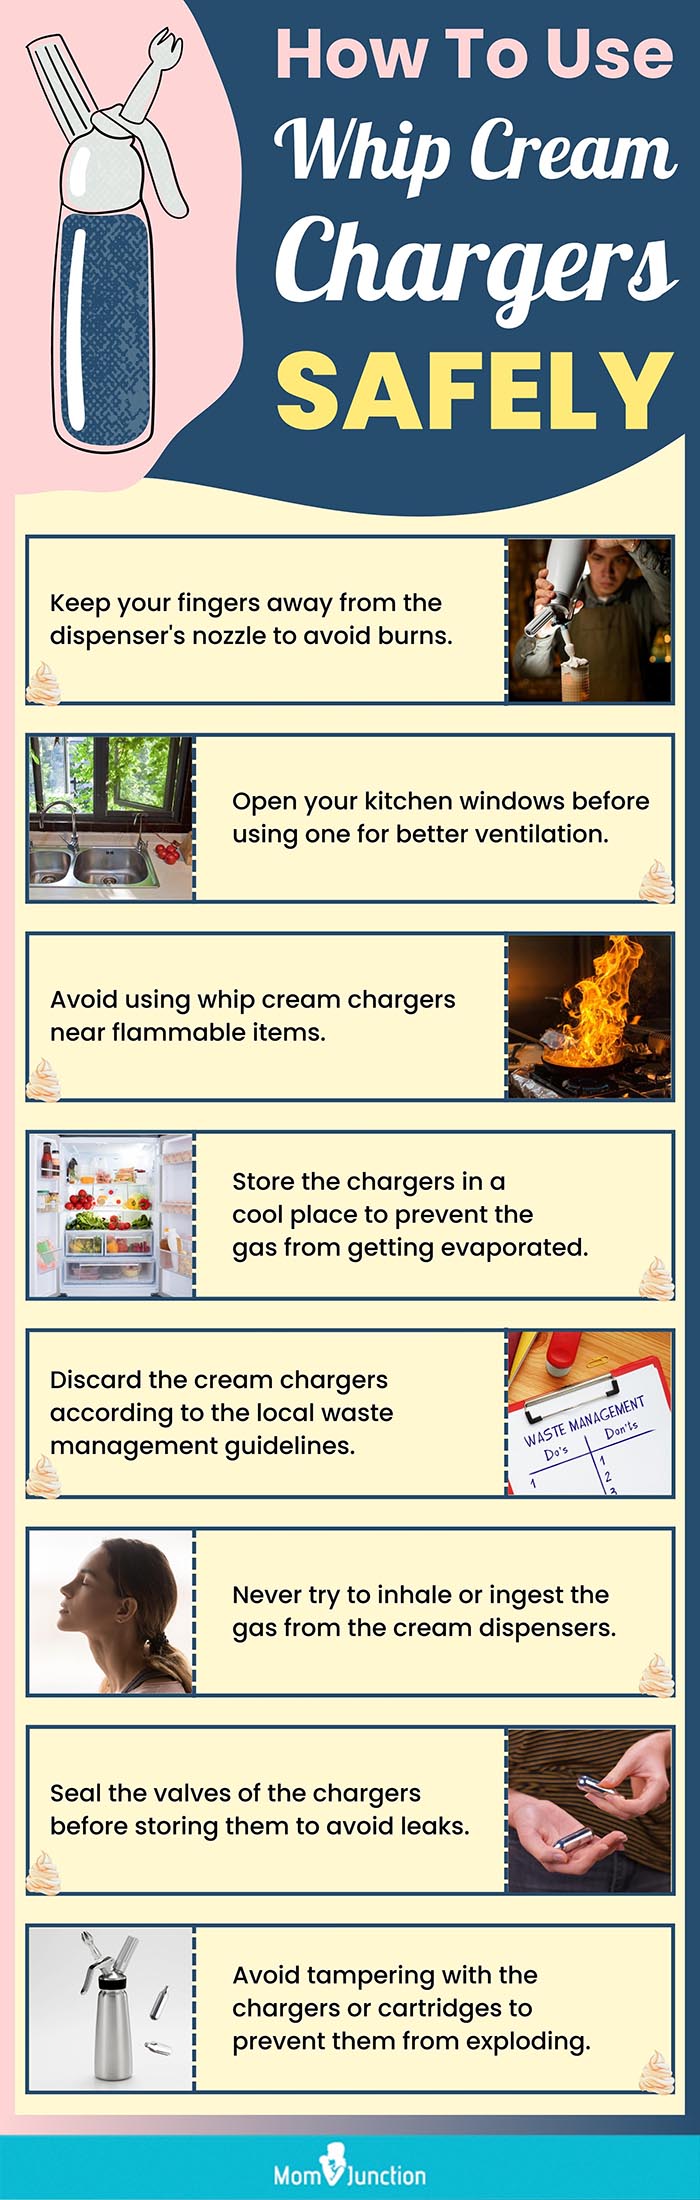 https://www.momjunction.com/wp-content/uploads/2023/02/How-To-Use-Whip-Cream-Chargers-Safely.jpg